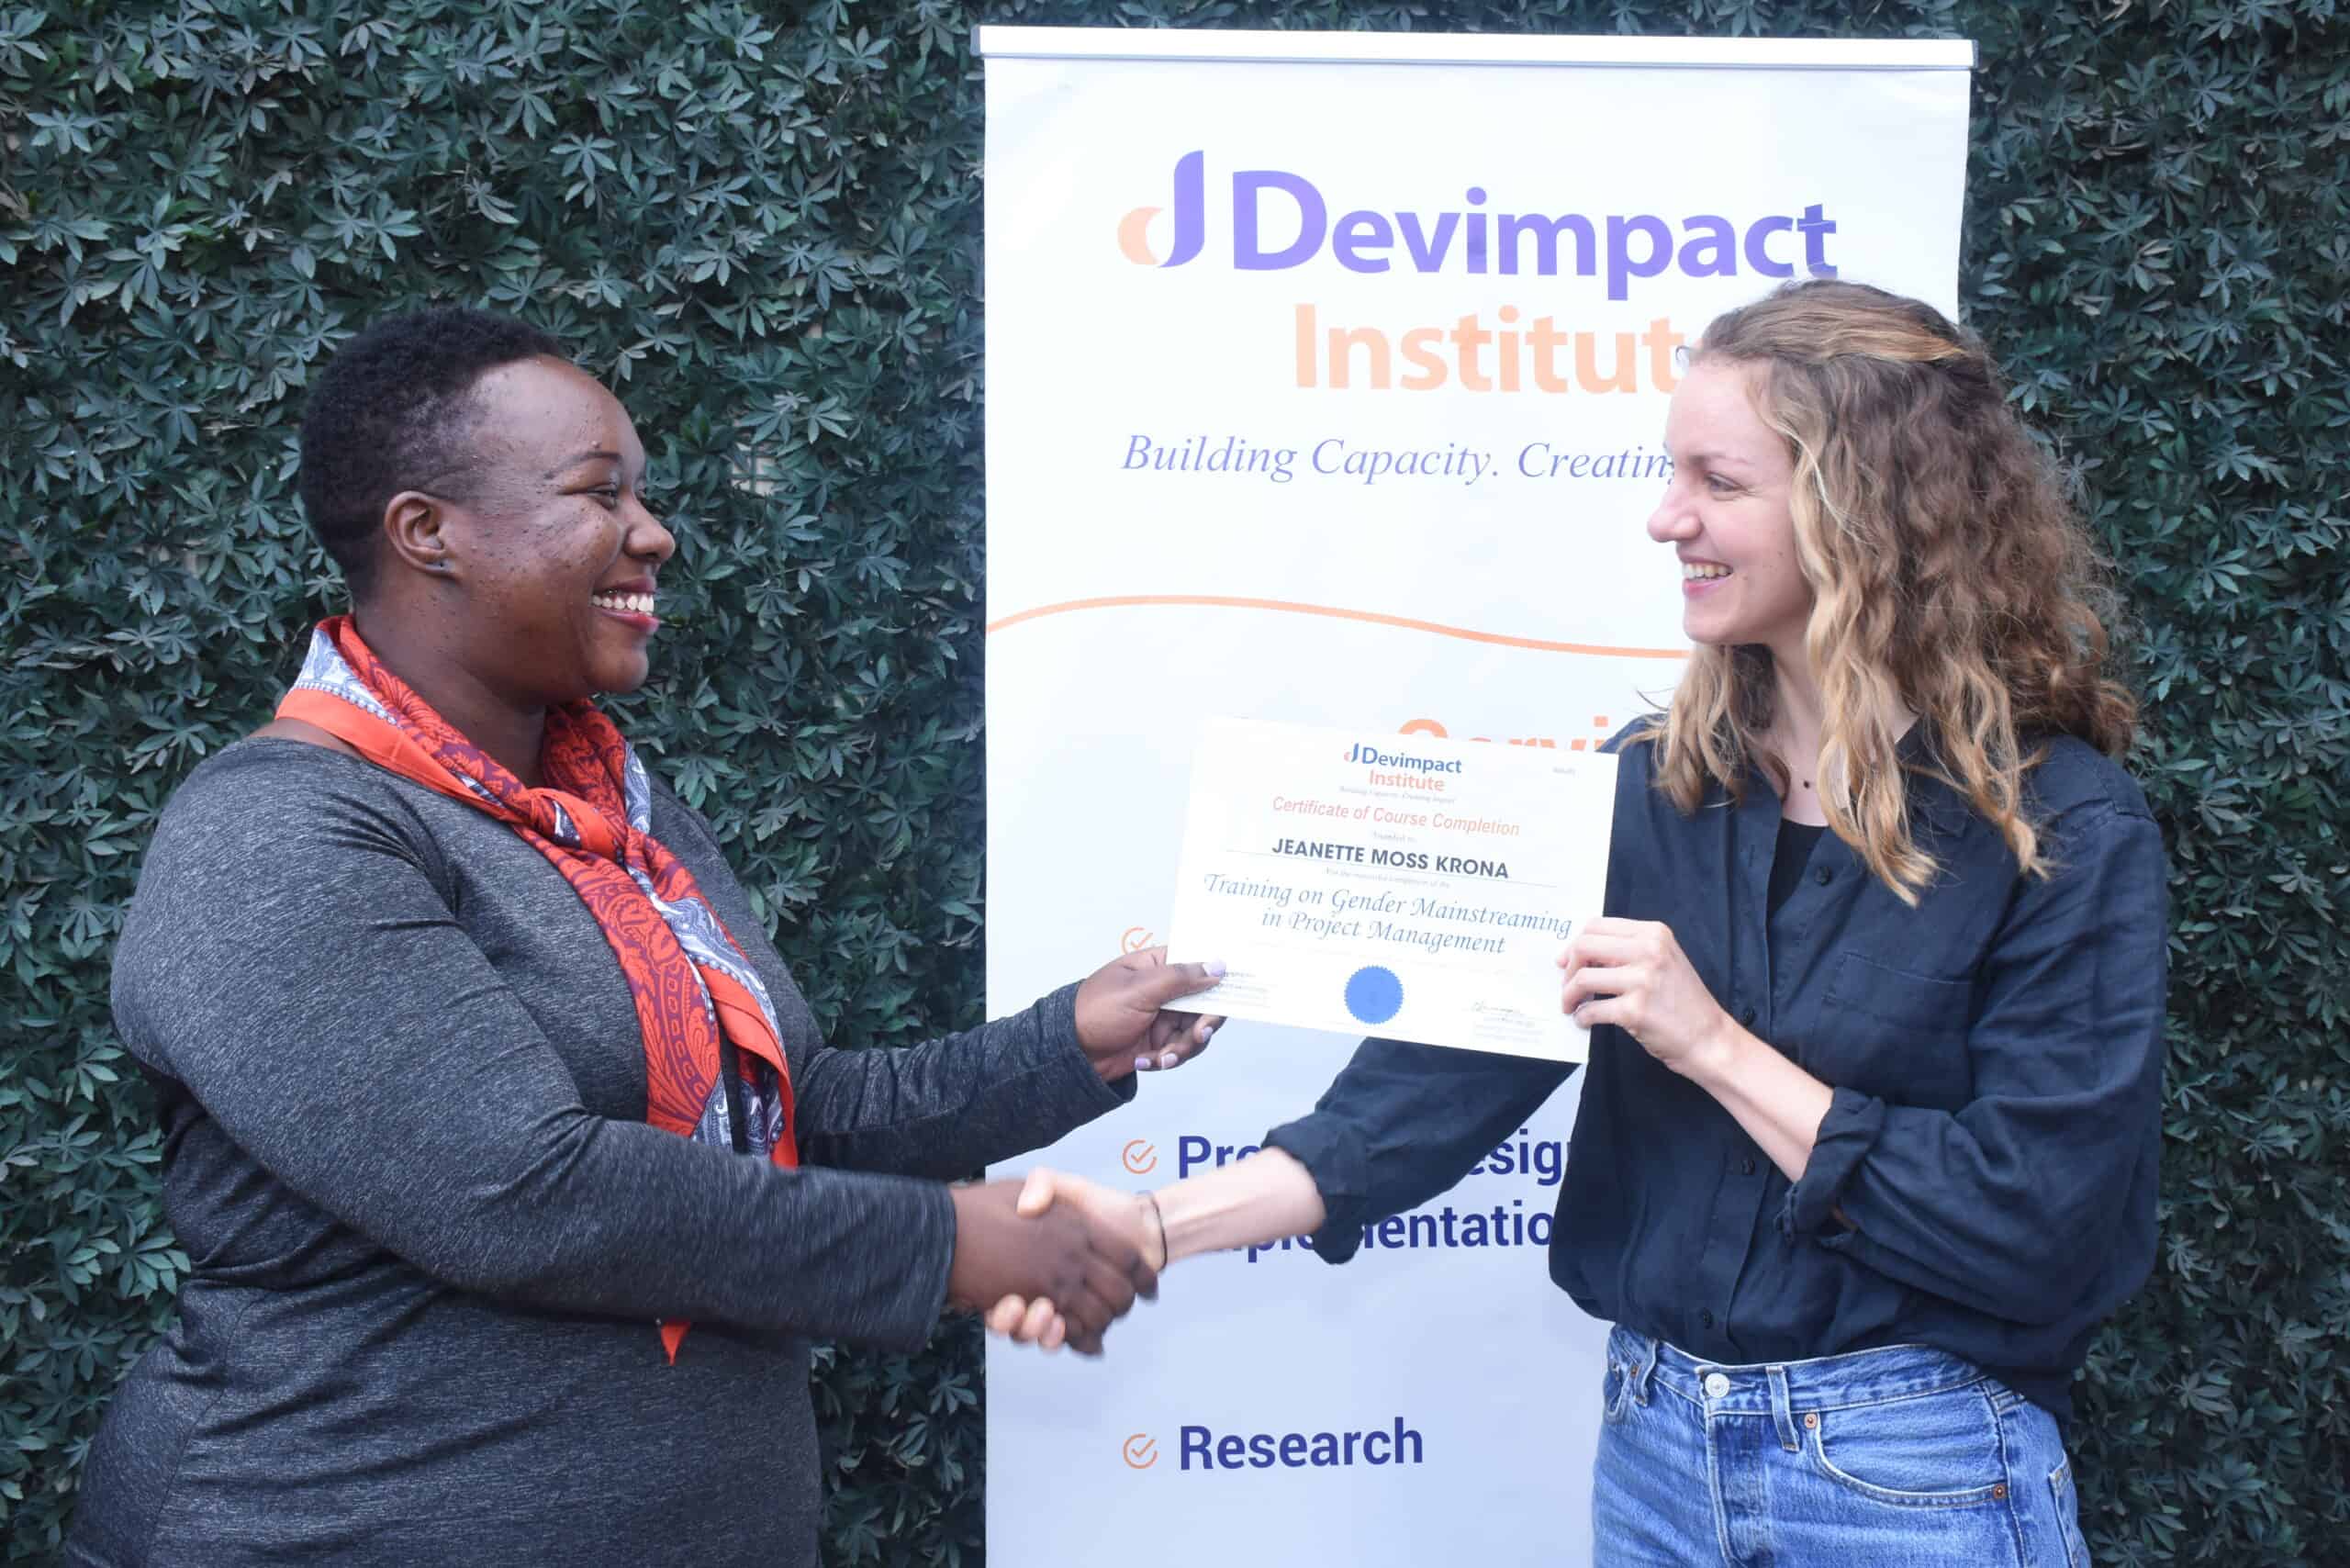 International training courses by Devimpact Institute